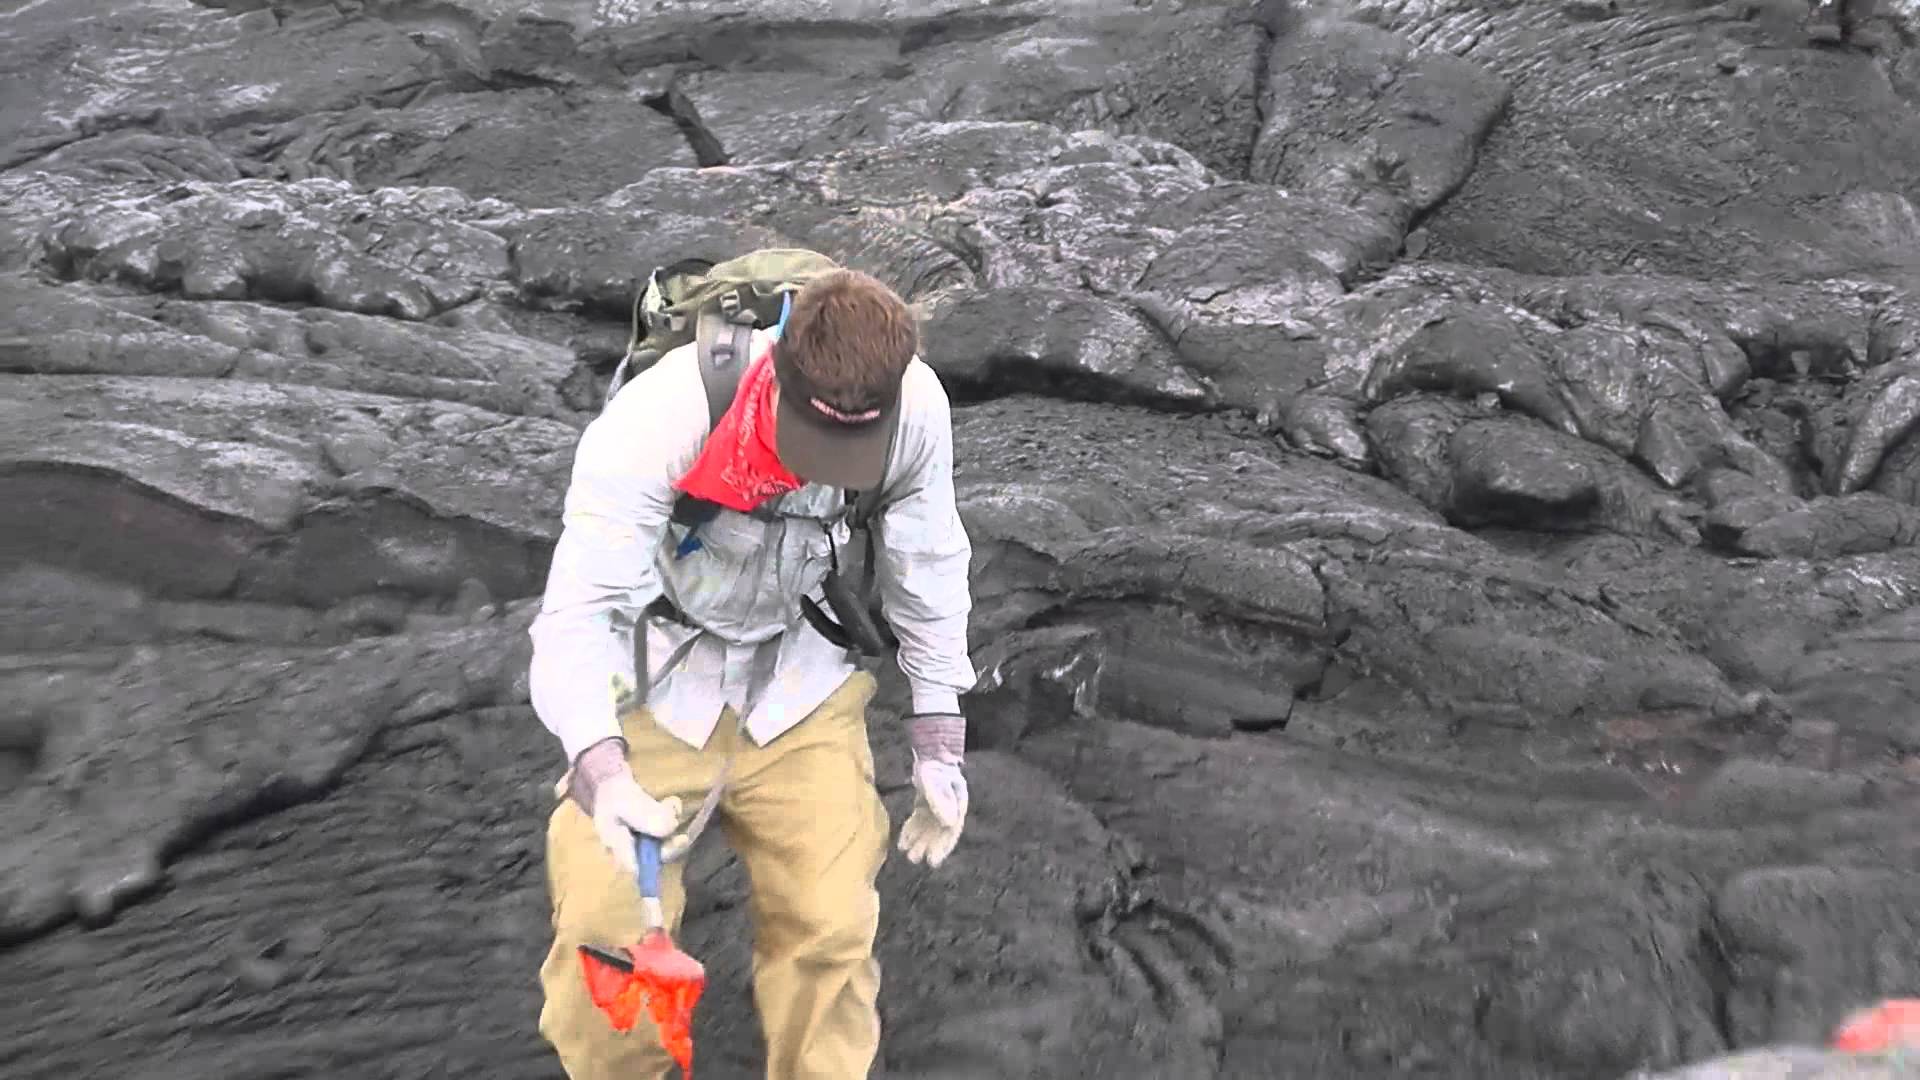 Collecting a fresh lava sample - YouTube